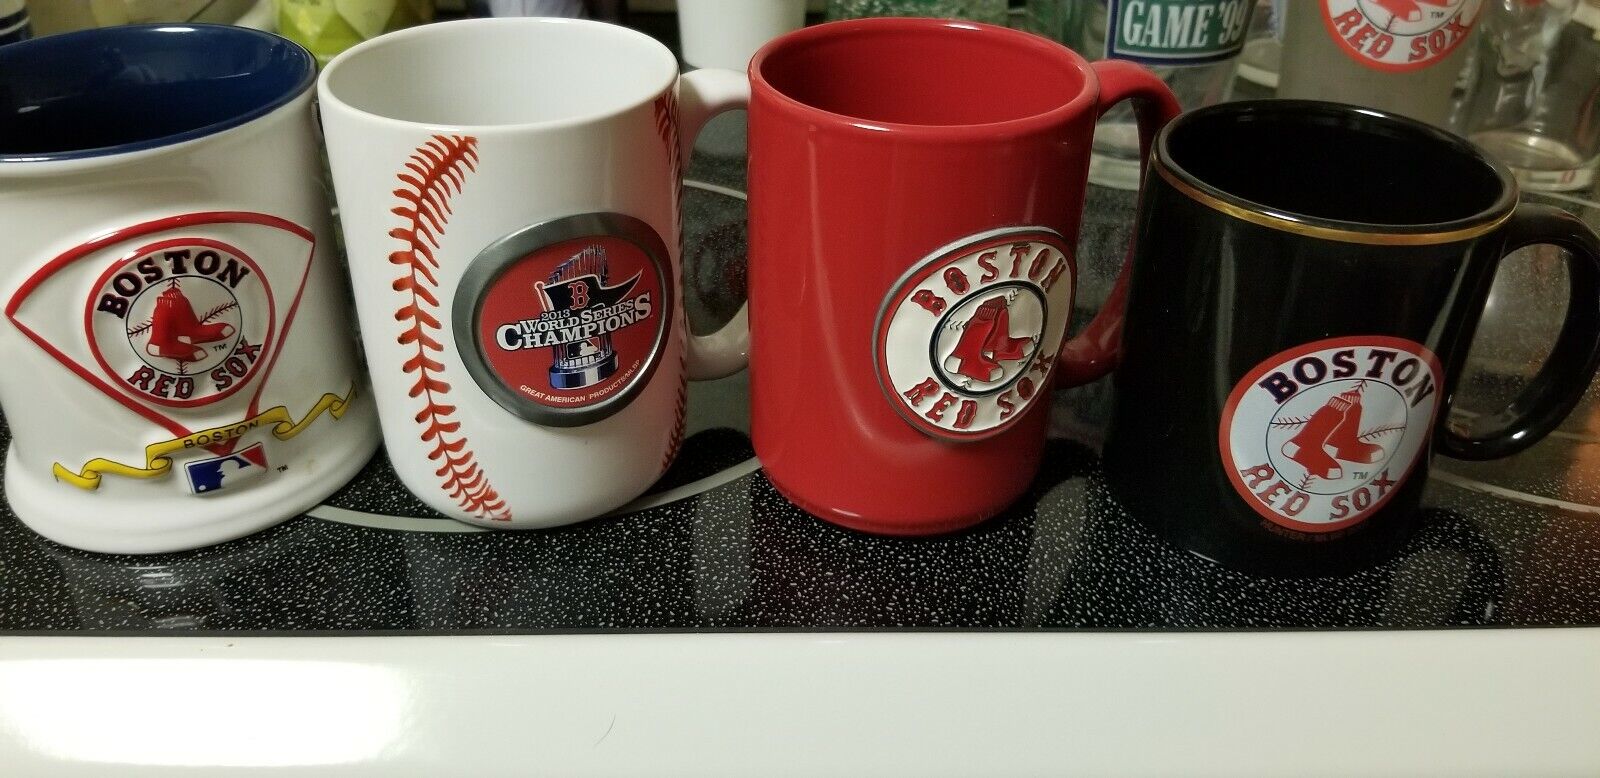 MLB Boston Redsox Glasses Mugs and Cups Collection